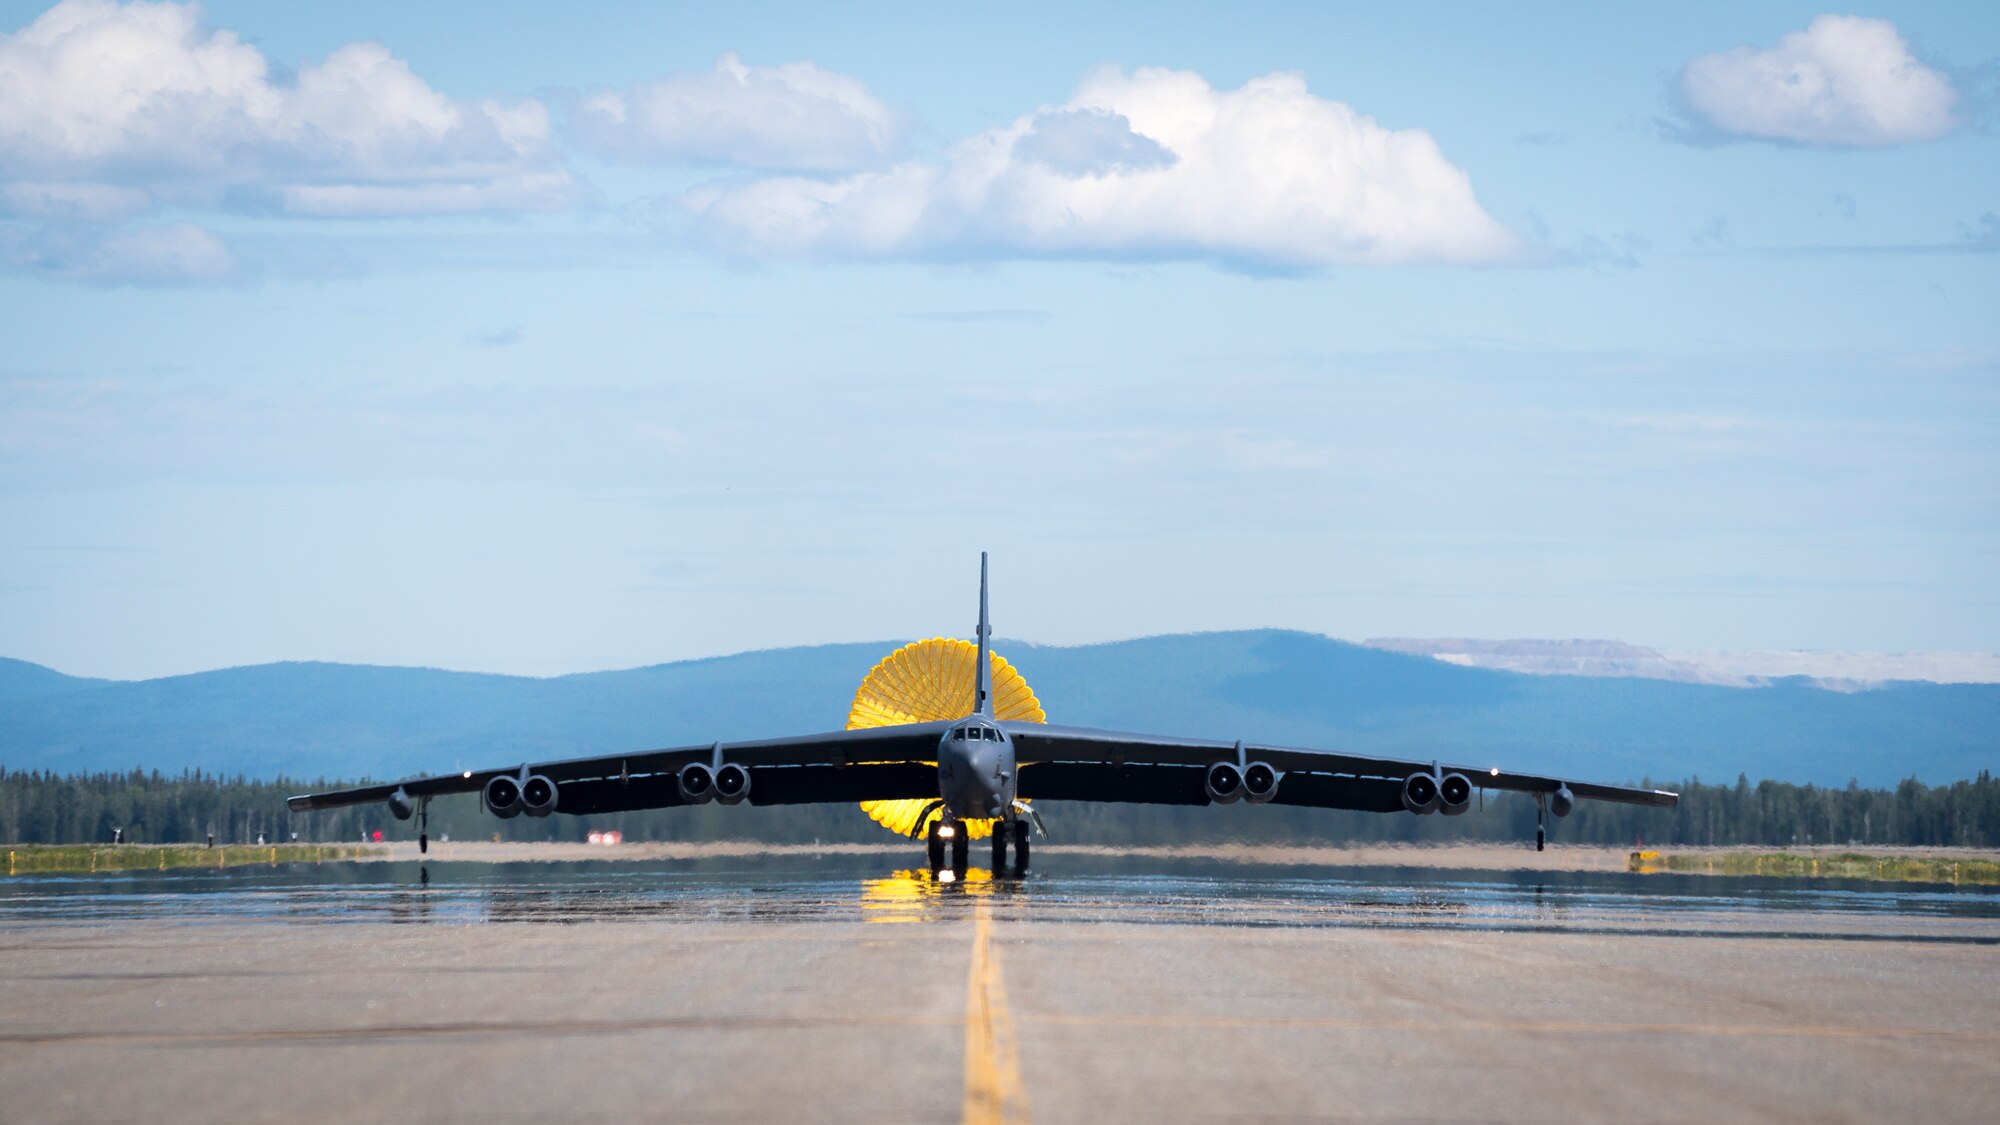 A B-52H Stratofortress deployed from Barksdale Air Force Base, La., taxis down the flightline at Eielson Air Force Base, Alaska, after conducting a Bomber Task Force mission over the Sea of Japan, June 17, 2020. Bomber Task Force missions help maintain global stability and security while enabling units to become familiar with operations in different regions. (U.S. Air Force photo by Senior Airman Lillian Miller)